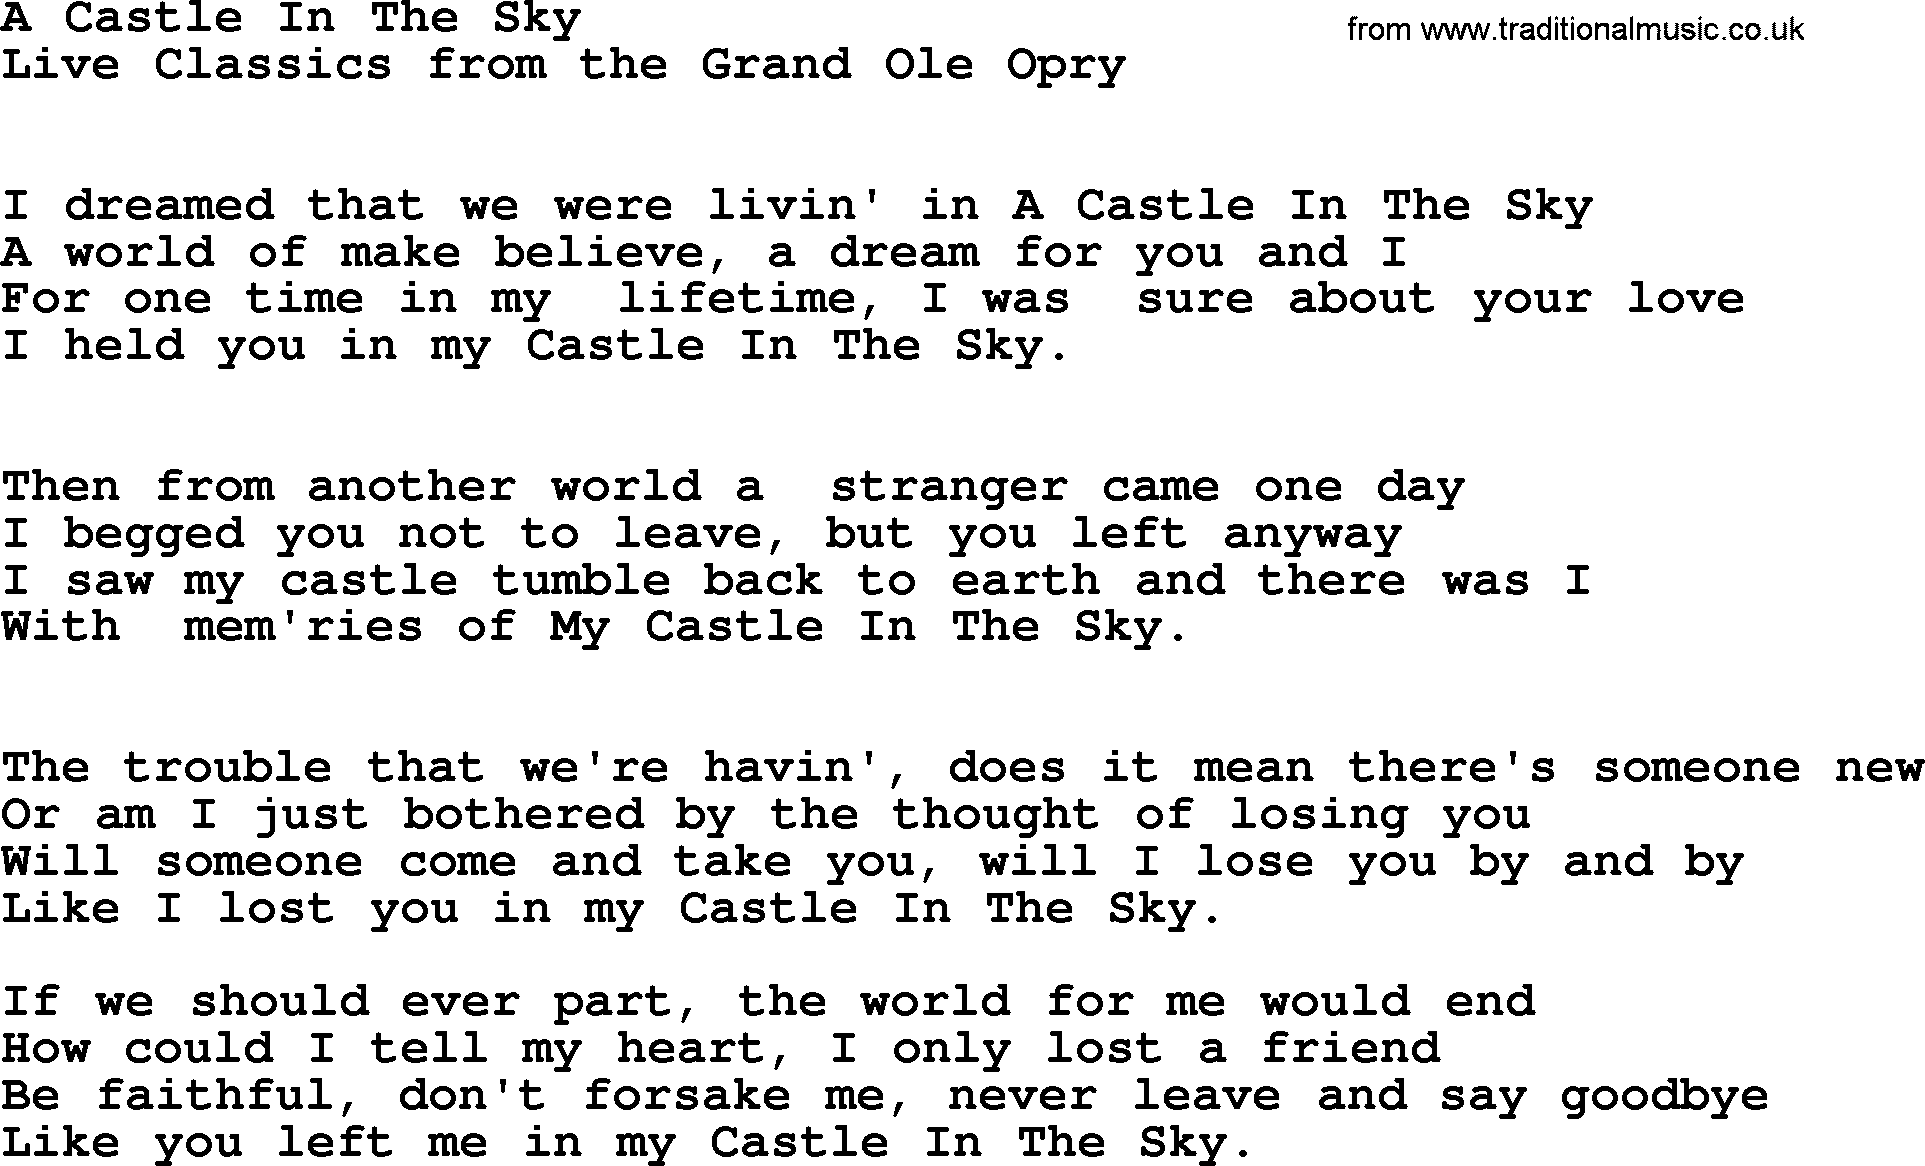 Marty Robbins song: A Castle In The Sky, lyrics